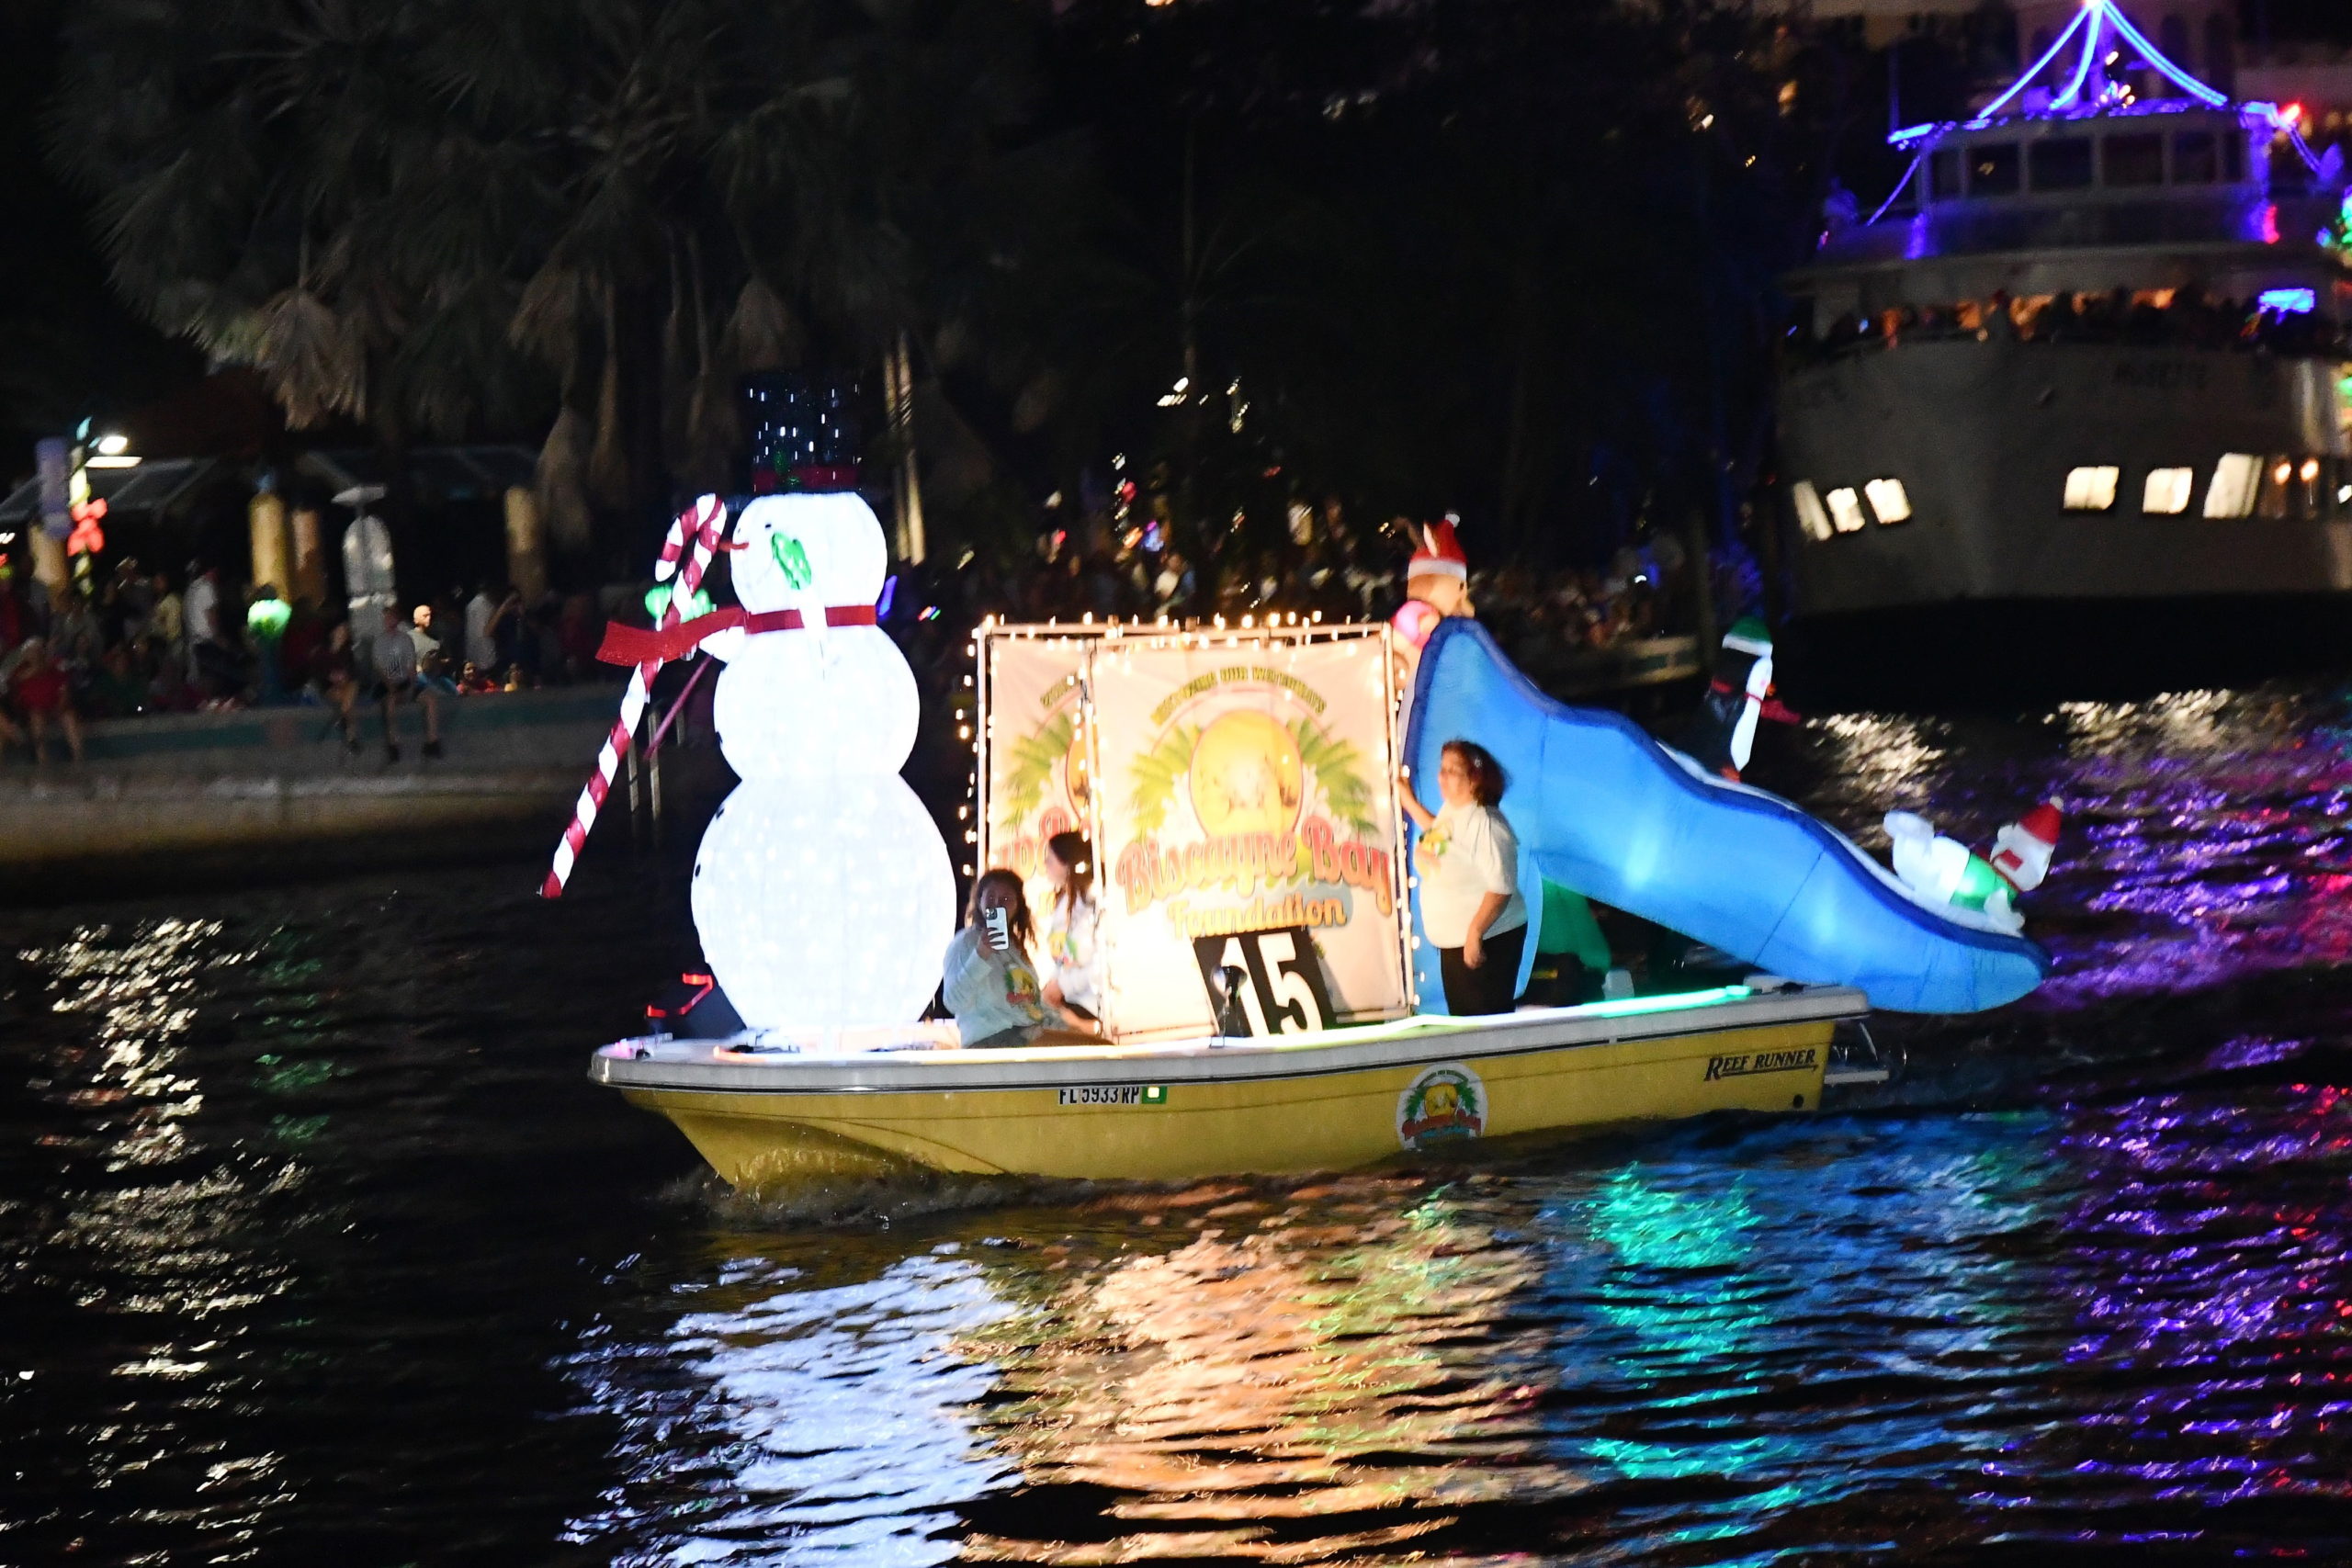 Biscayne Bay Foundation, boat number 15 in the 2022 Winterfest Boat Parade